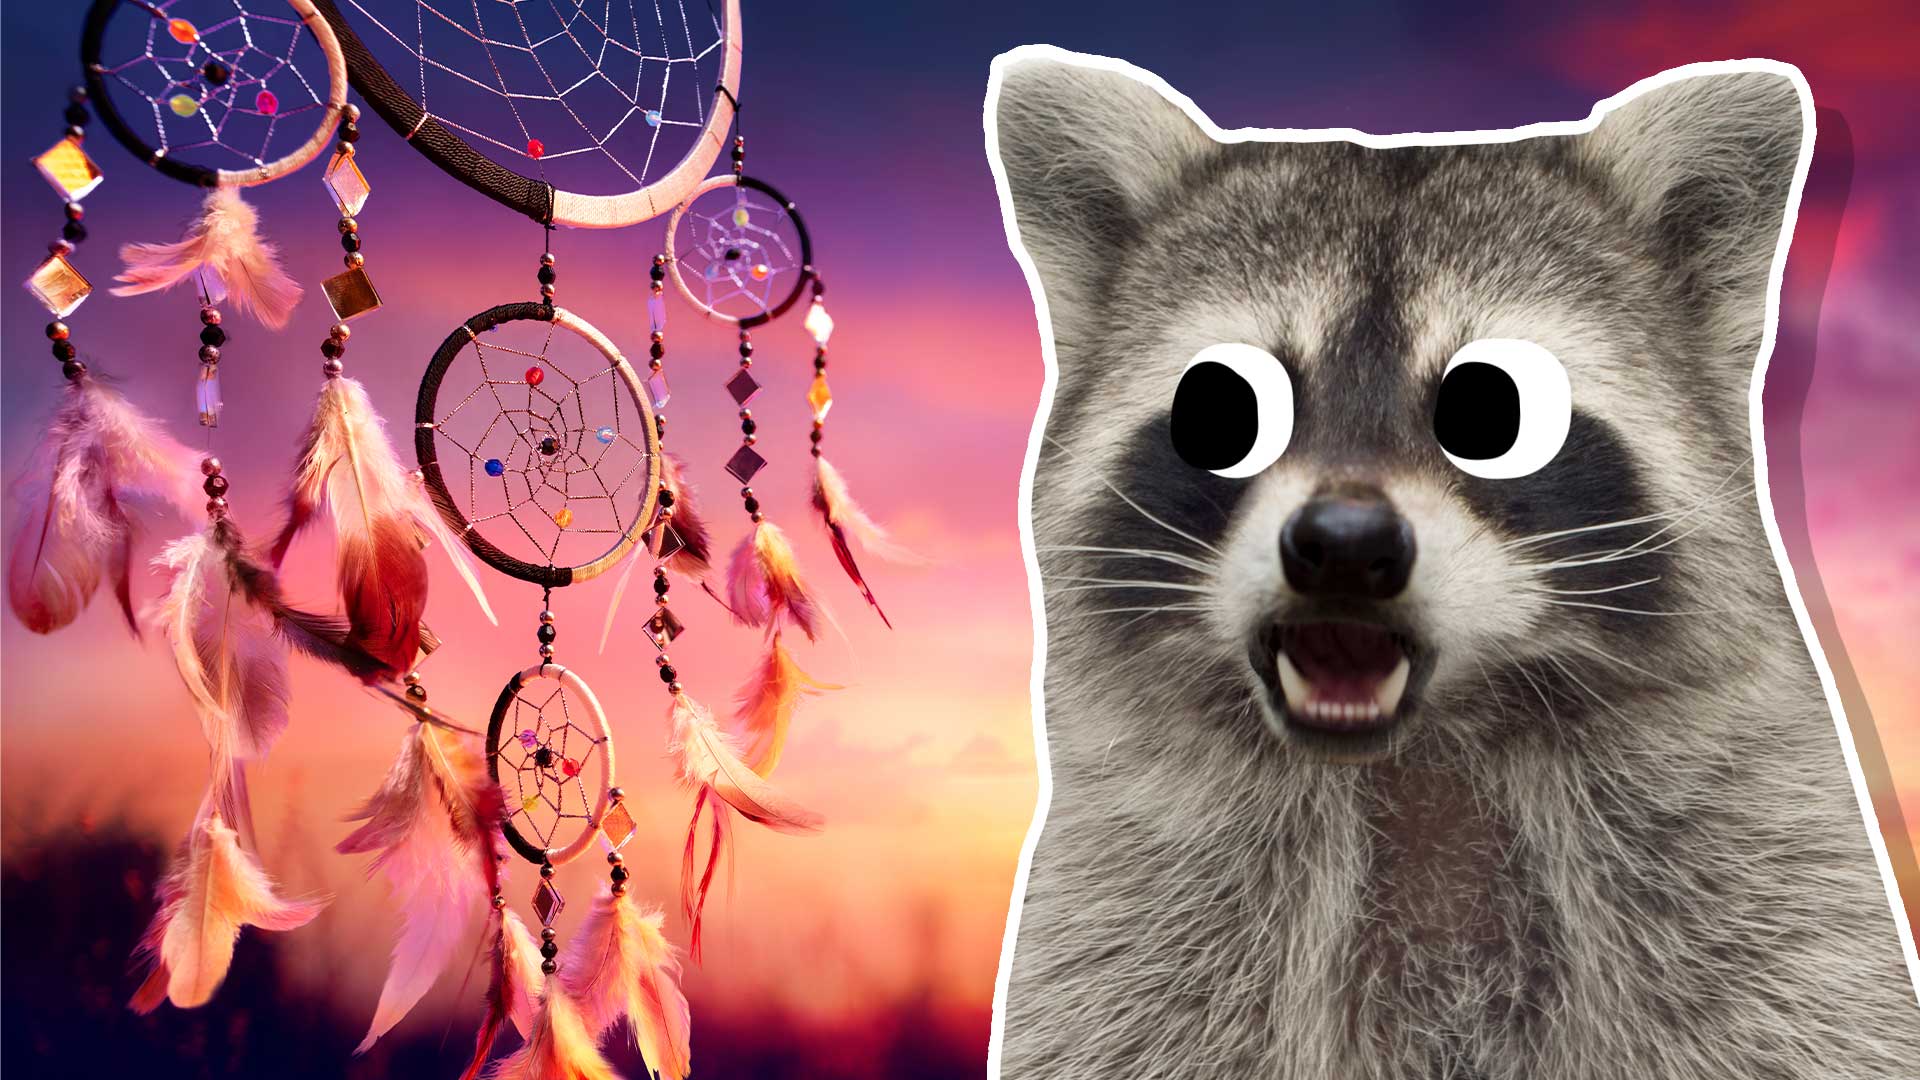 A dreamcatcher and a racoon